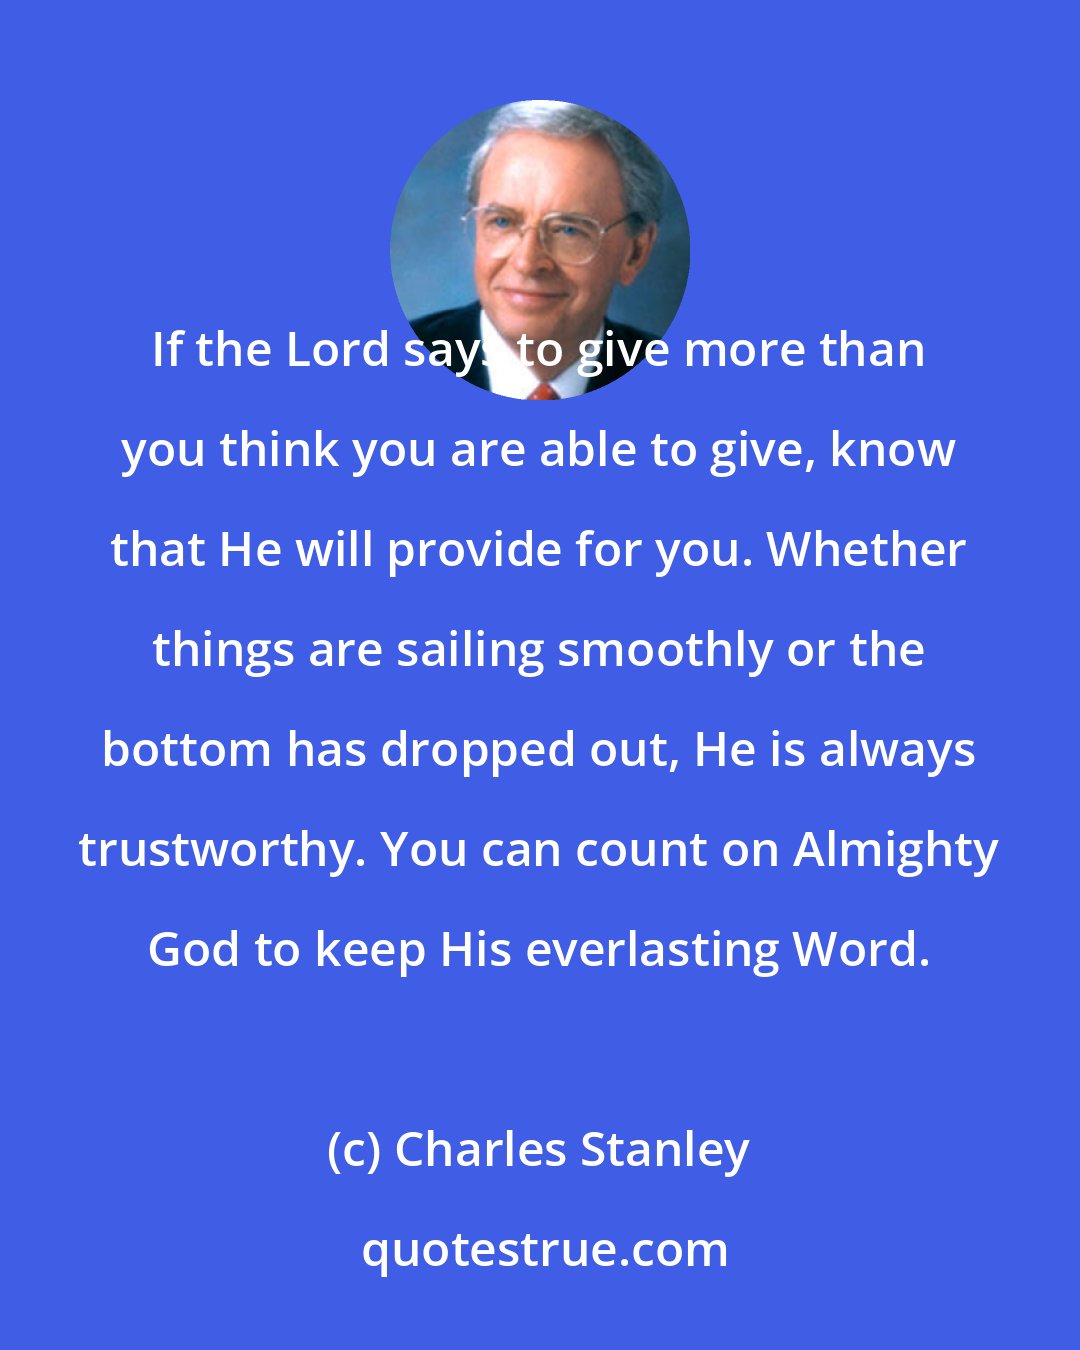 Charles Stanley: If the Lord says to give more than you think you are able to give, know that He will provide for you. Whether things are sailing smoothly or the bottom has dropped out, He is always trustworthy. You can count on Almighty God to keep His everlasting Word.